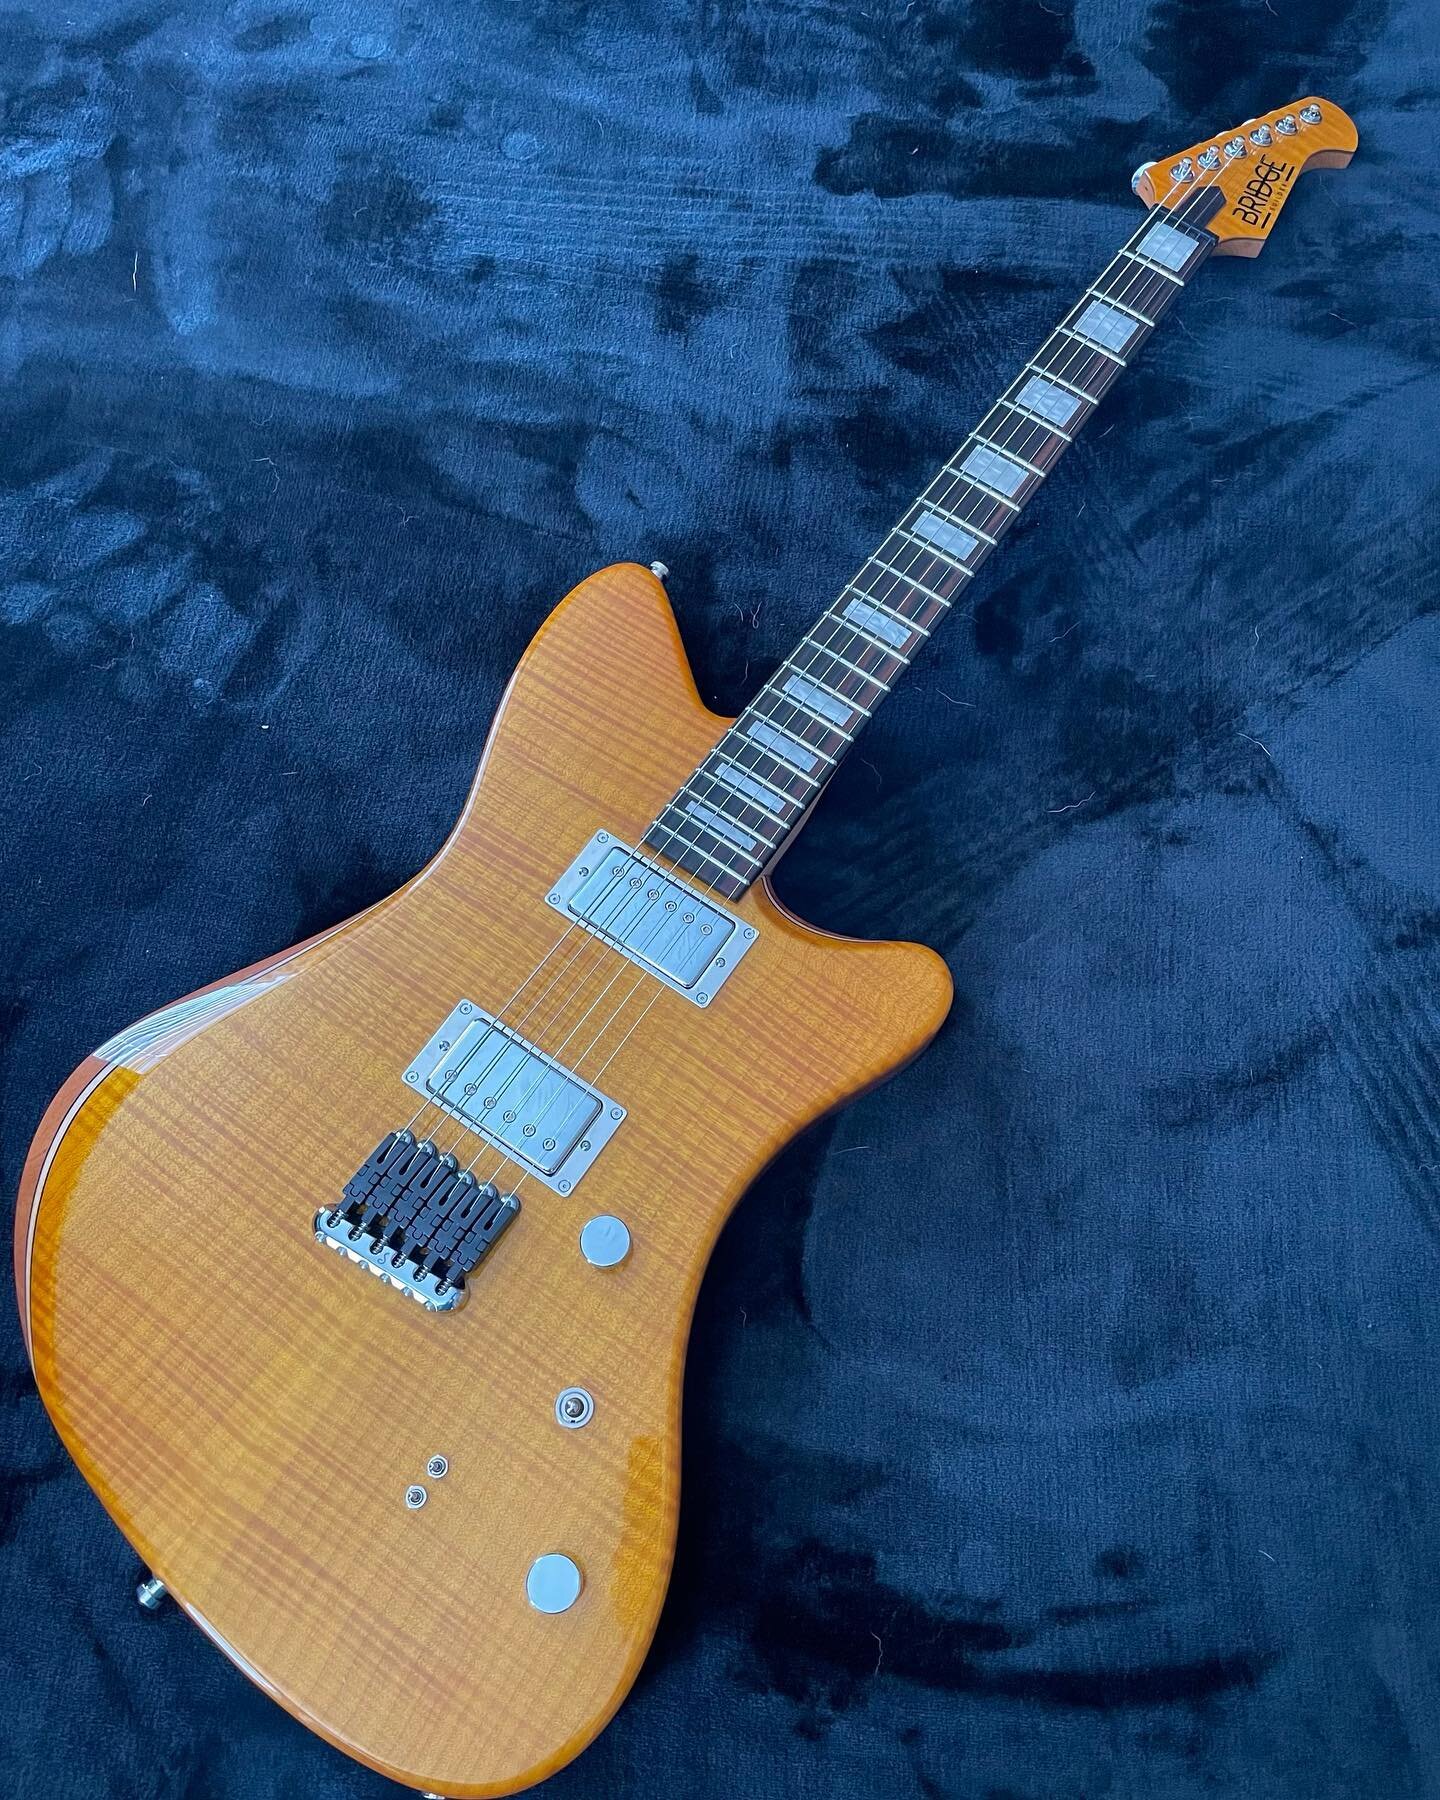 #22 in &lsquo;22

This JazzBuilder may be fender inspired in shape, but it&rsquo;s all Les Paul in its appointments. Pearl block inlays, Amber finish courtesy of our friends @wilkinsguitars, and great sounding humbuckers from the fine people @porterp